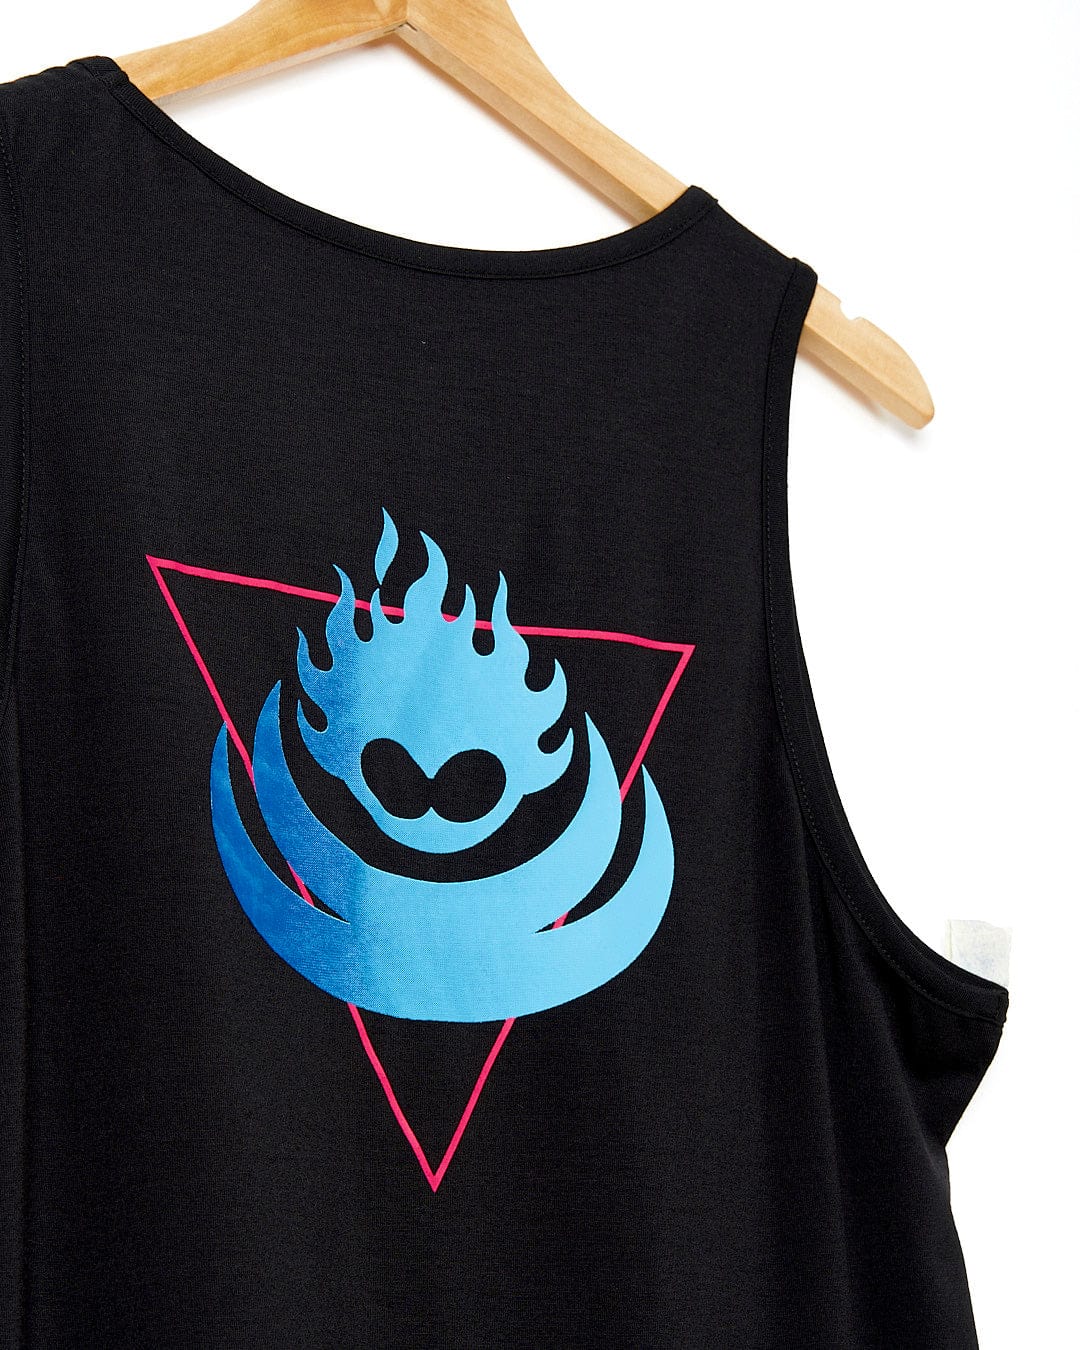 A black Flame Tri - Mens Recycled Vest with a blue flame on it by Saltrock.